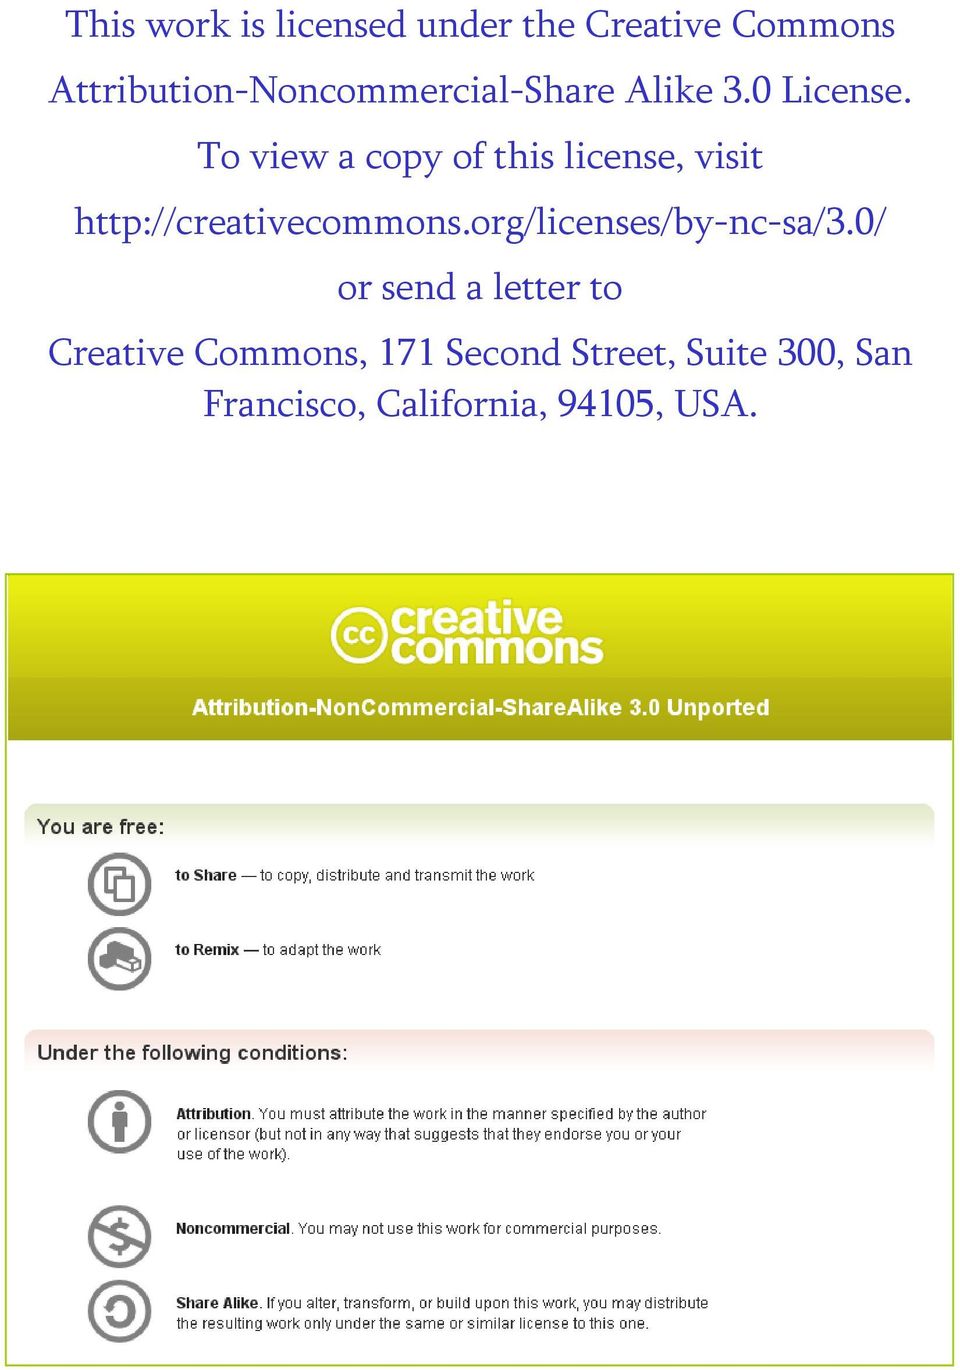 To view a copy of this license, visit http://creativecommons.